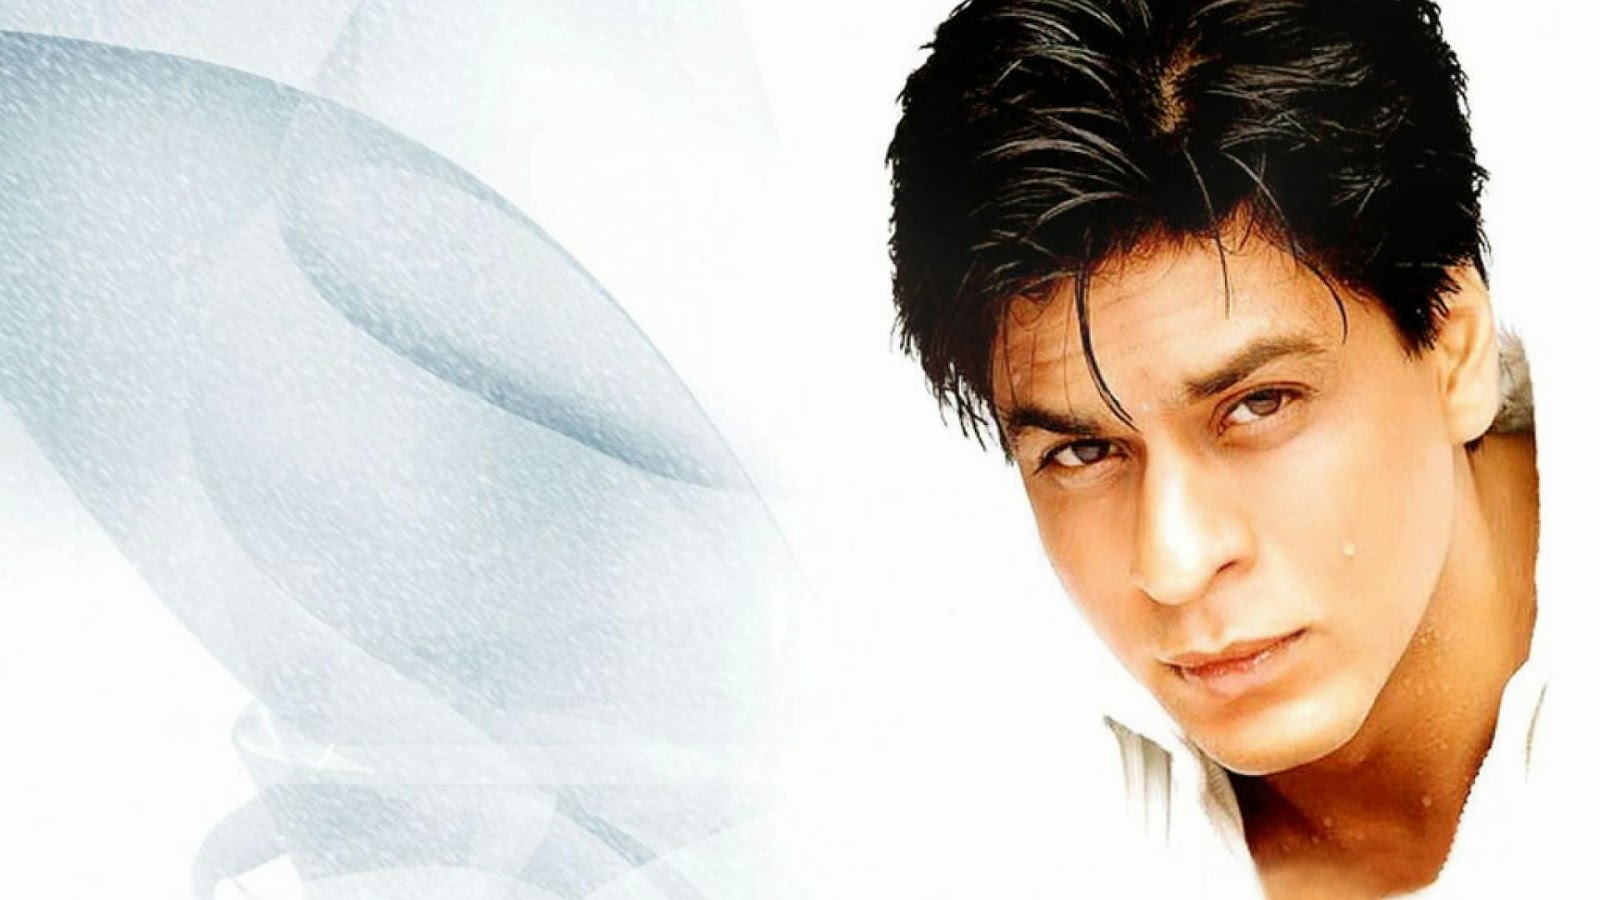 Bollywood Actors Pictures. Indian Actors Pictures!: Bollywood Baadshah ...